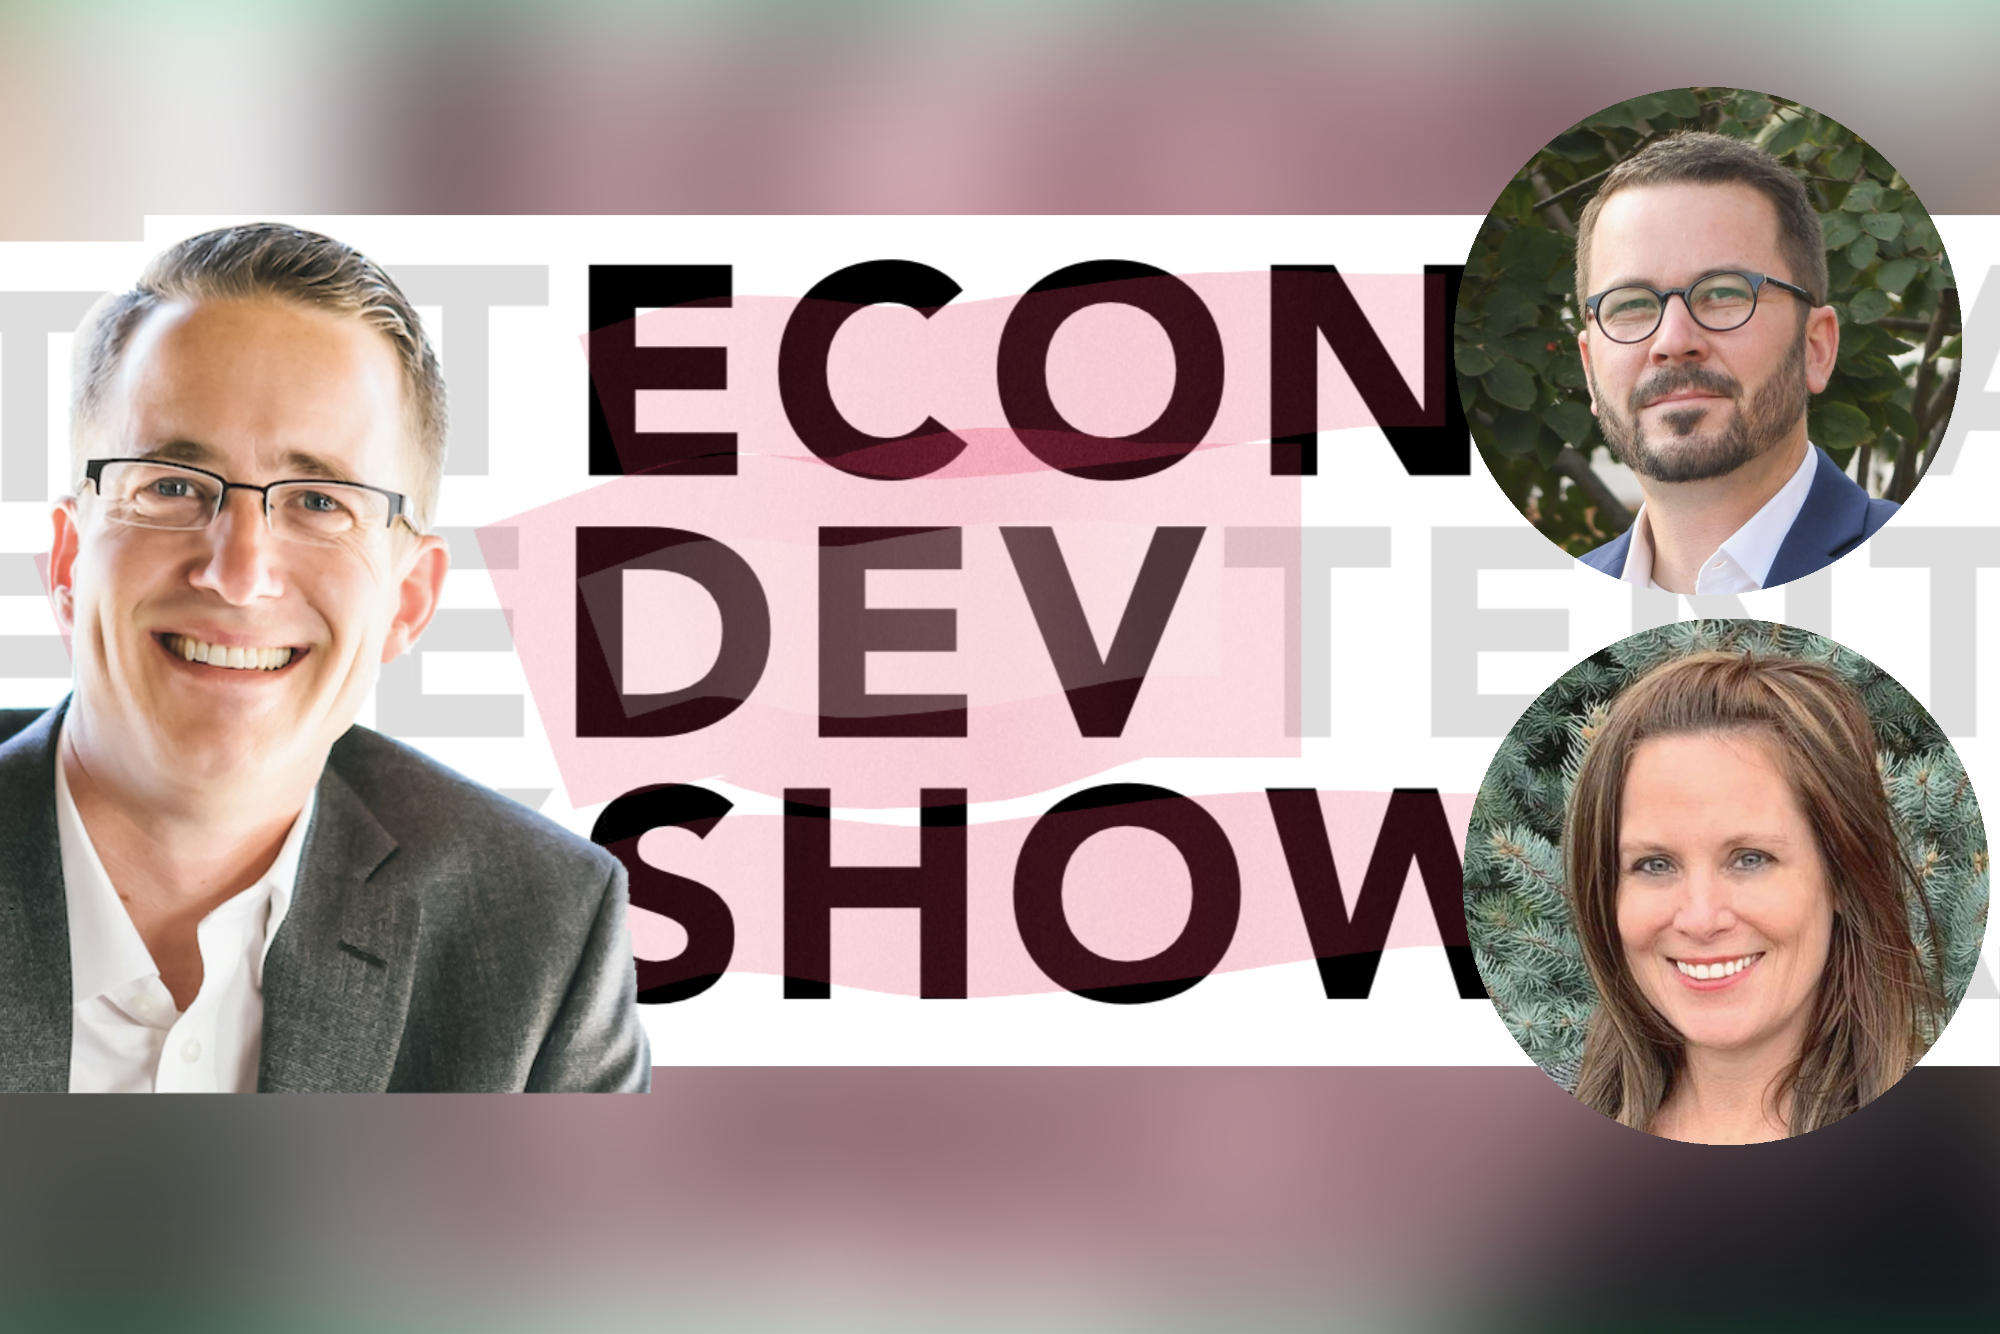 Podcast Episode 69 - Tackling Workforce Development from a Unique Angle With Clint Knight and Sandy Messner